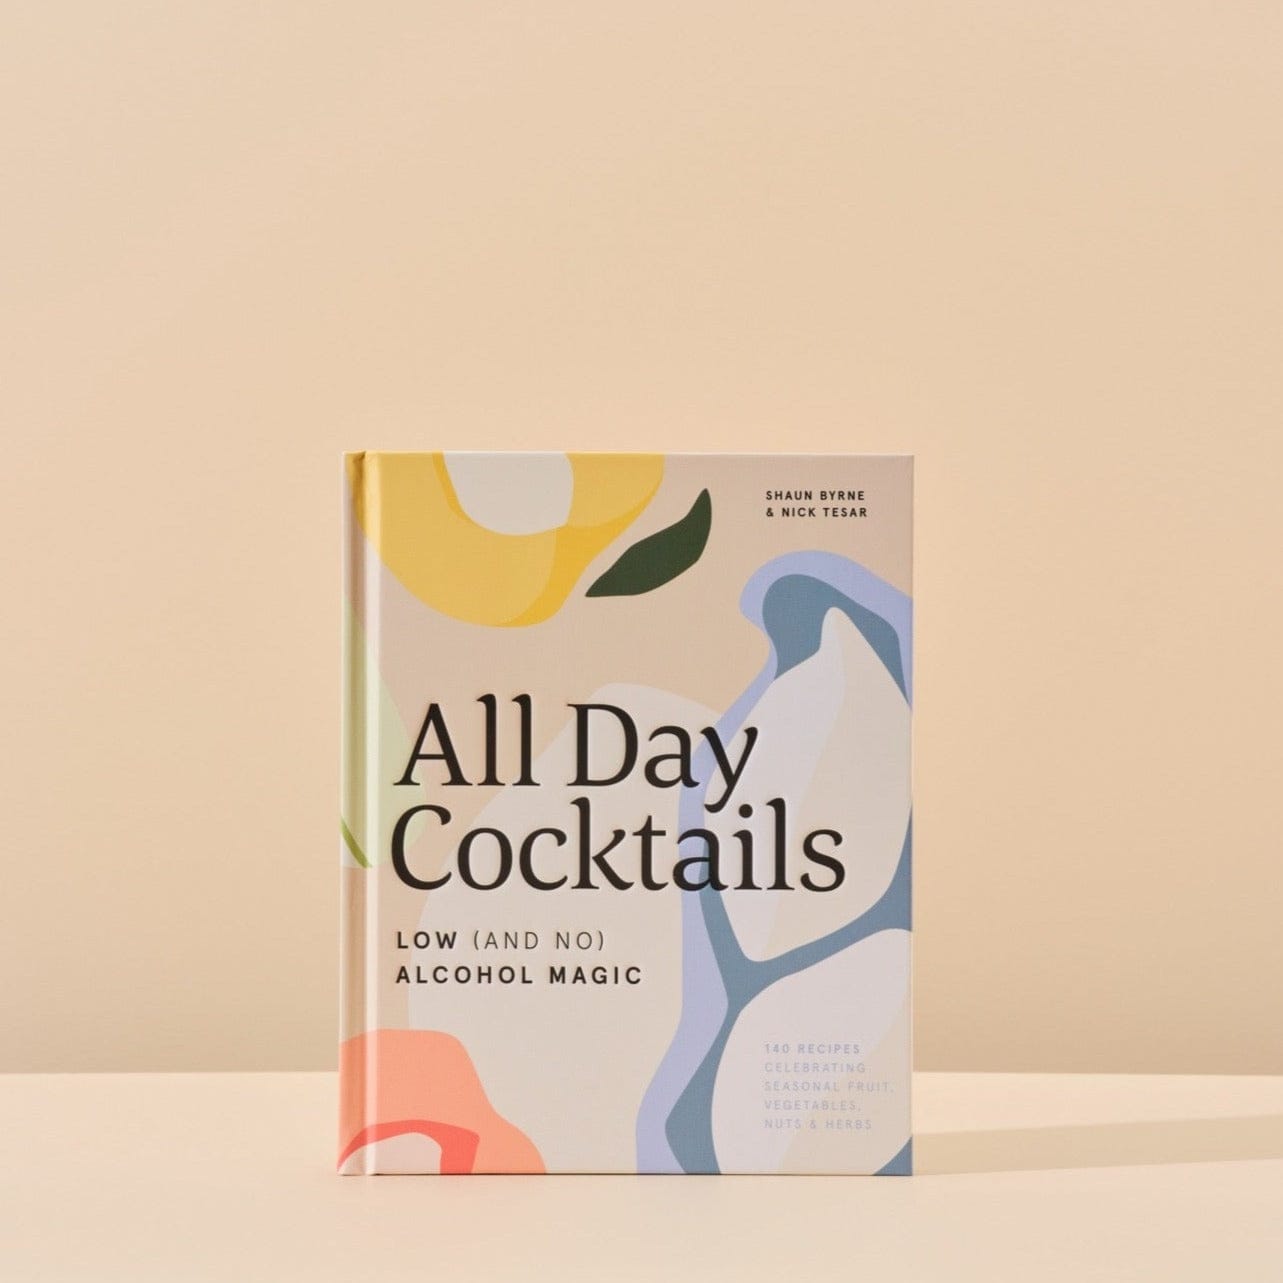 All Day Cocktails book cover